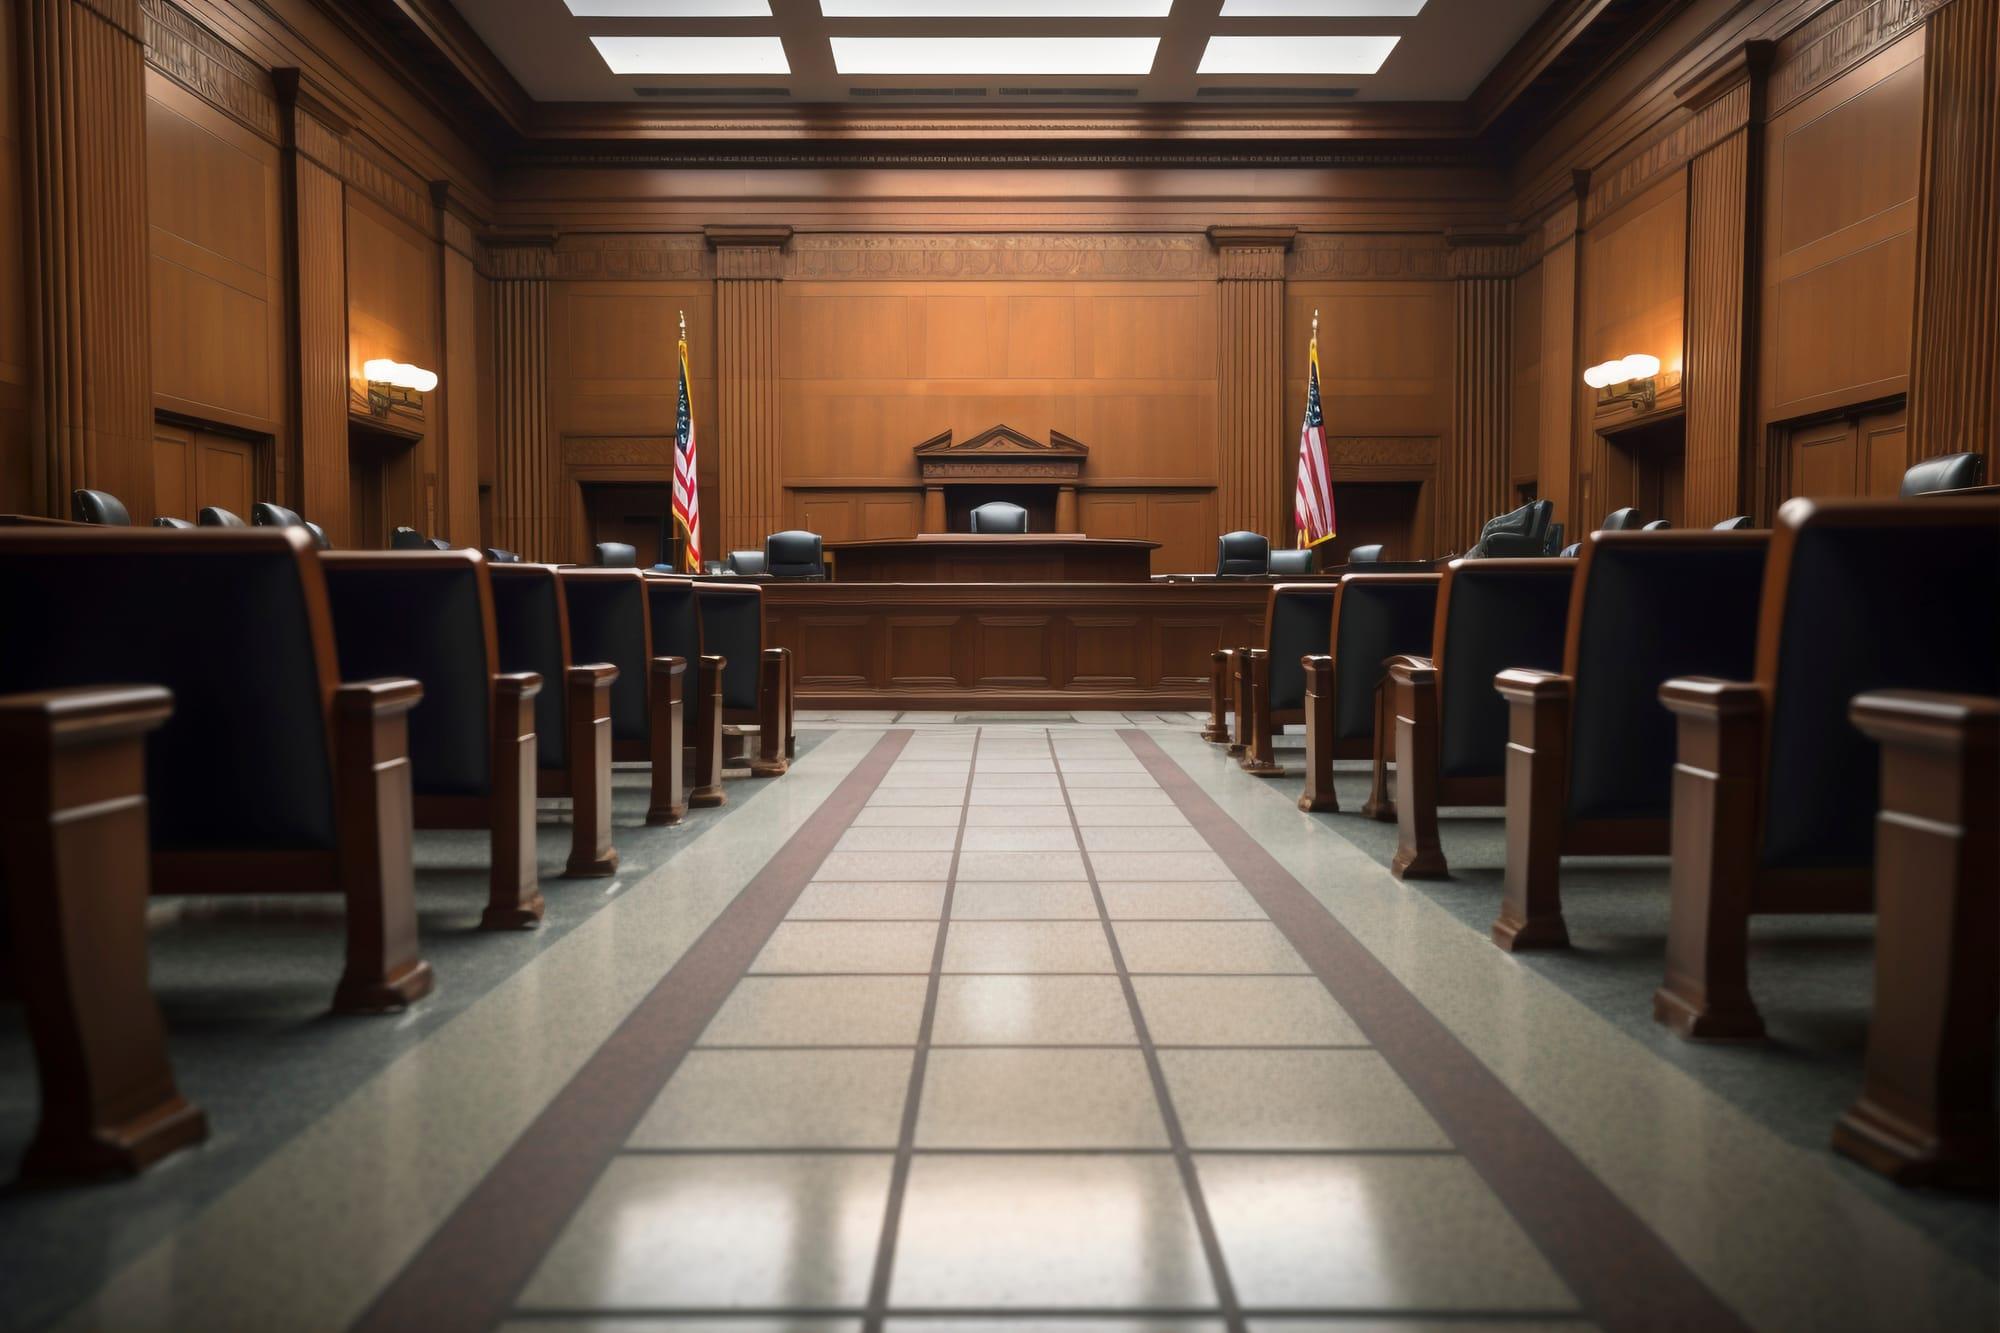 Courtroom highlighting Uniswap's challenge to the SEC's regulations on decentralized exchange and DeFi solutions.